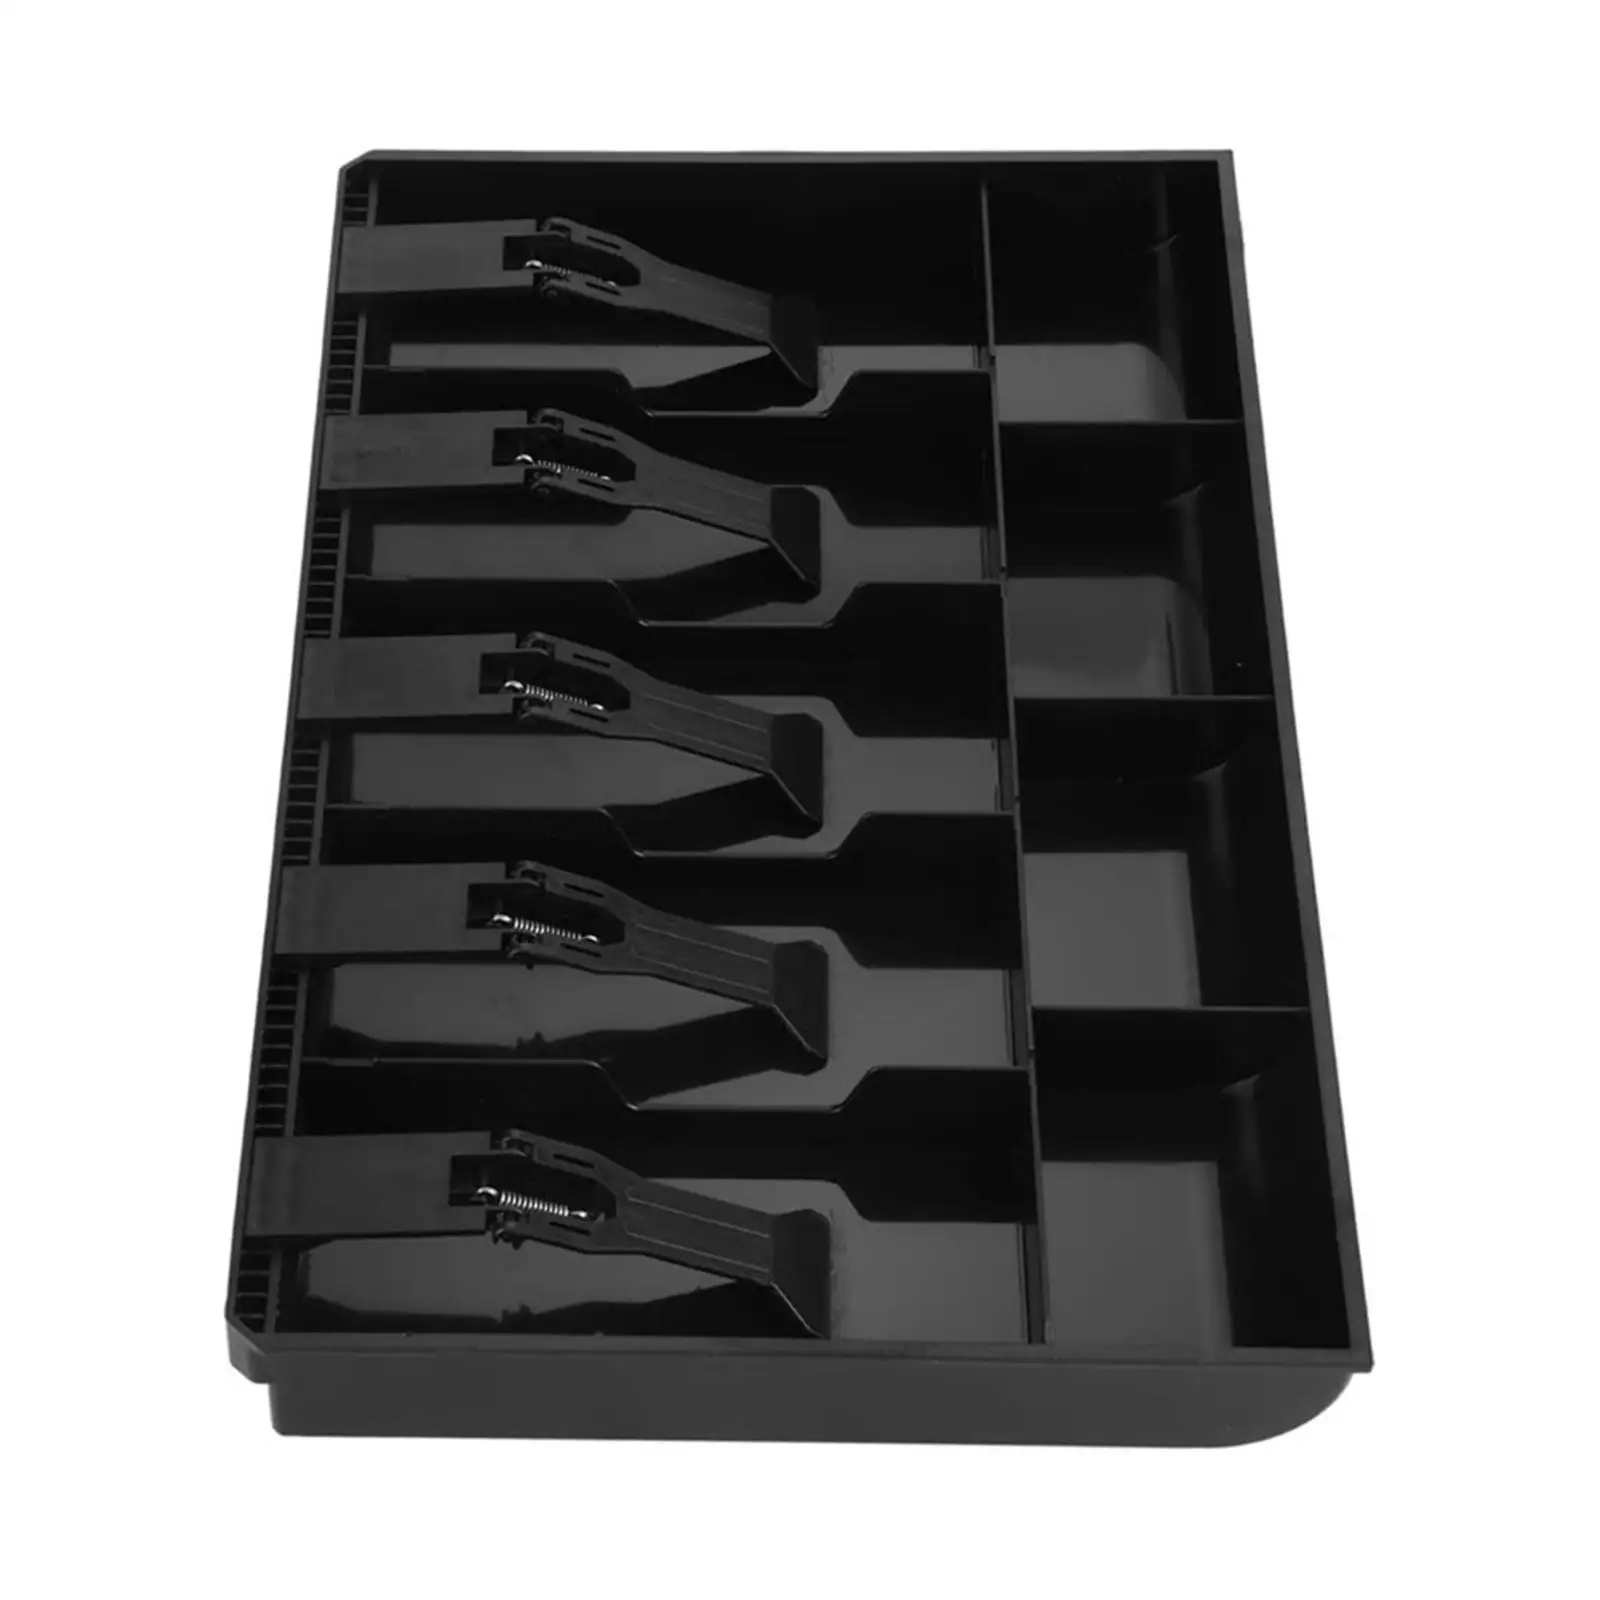 Metal Clip,12.68x9.65x1.38inch Shops 4 Bill/3 Coin Market Storage Coin Register Cash Money Tray Replacement Insert Tray Storage Case with Clip for Supermarkets RV77 Cash Register Drawer Hotels 